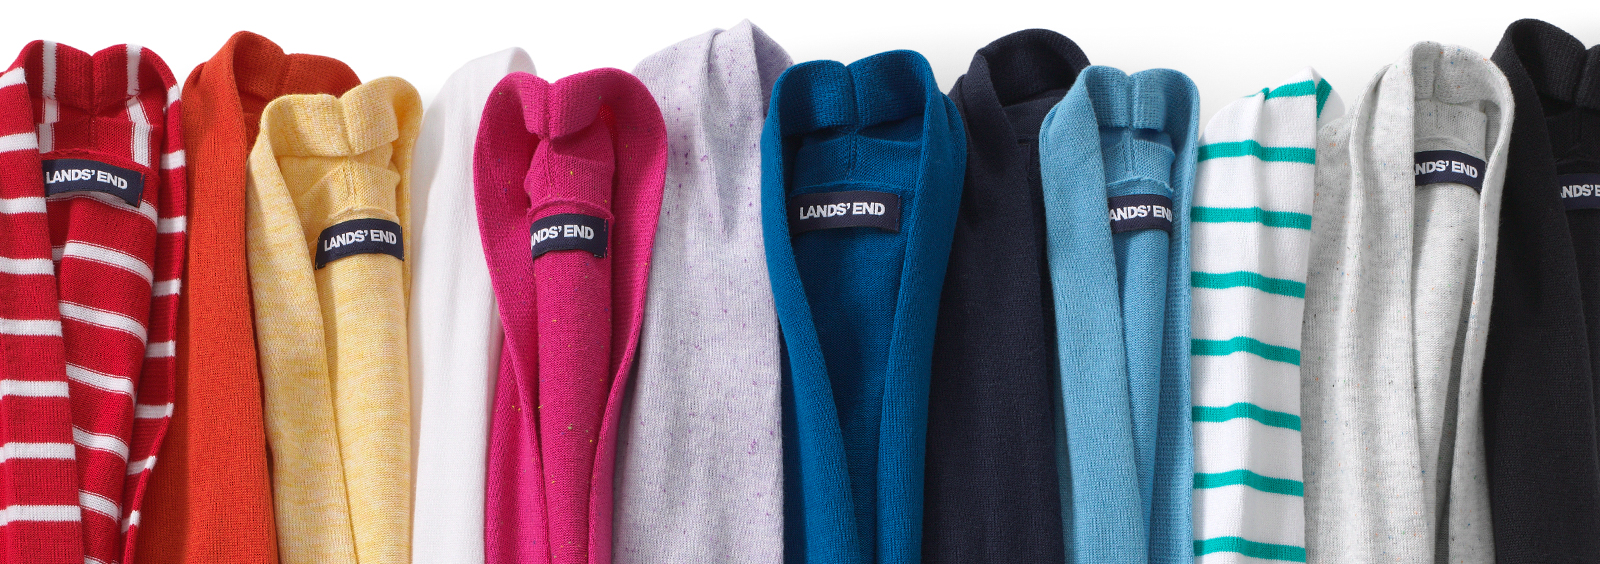 The Best Cardigans to Match Your Dresses | Lands’ End